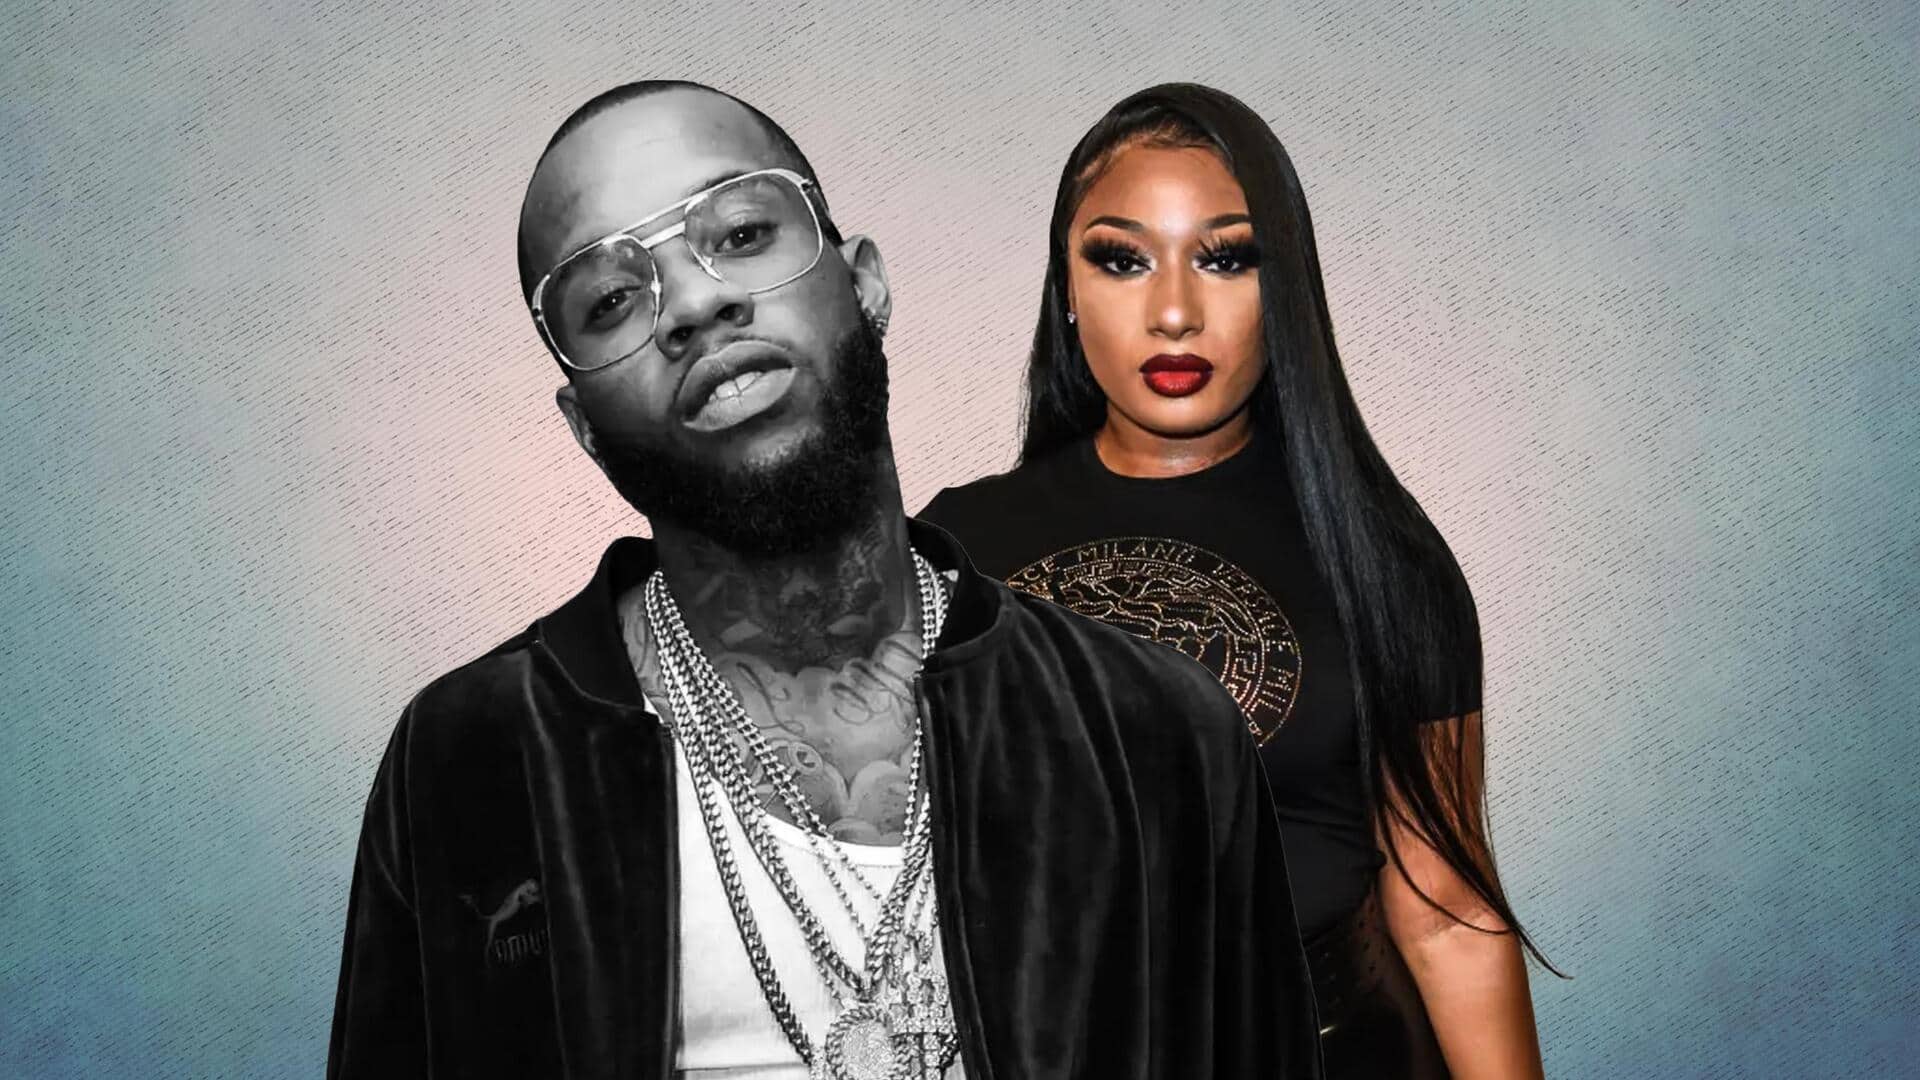 Megan Thee Stallion case: Why Tory Lanez's sentencing was delayed 